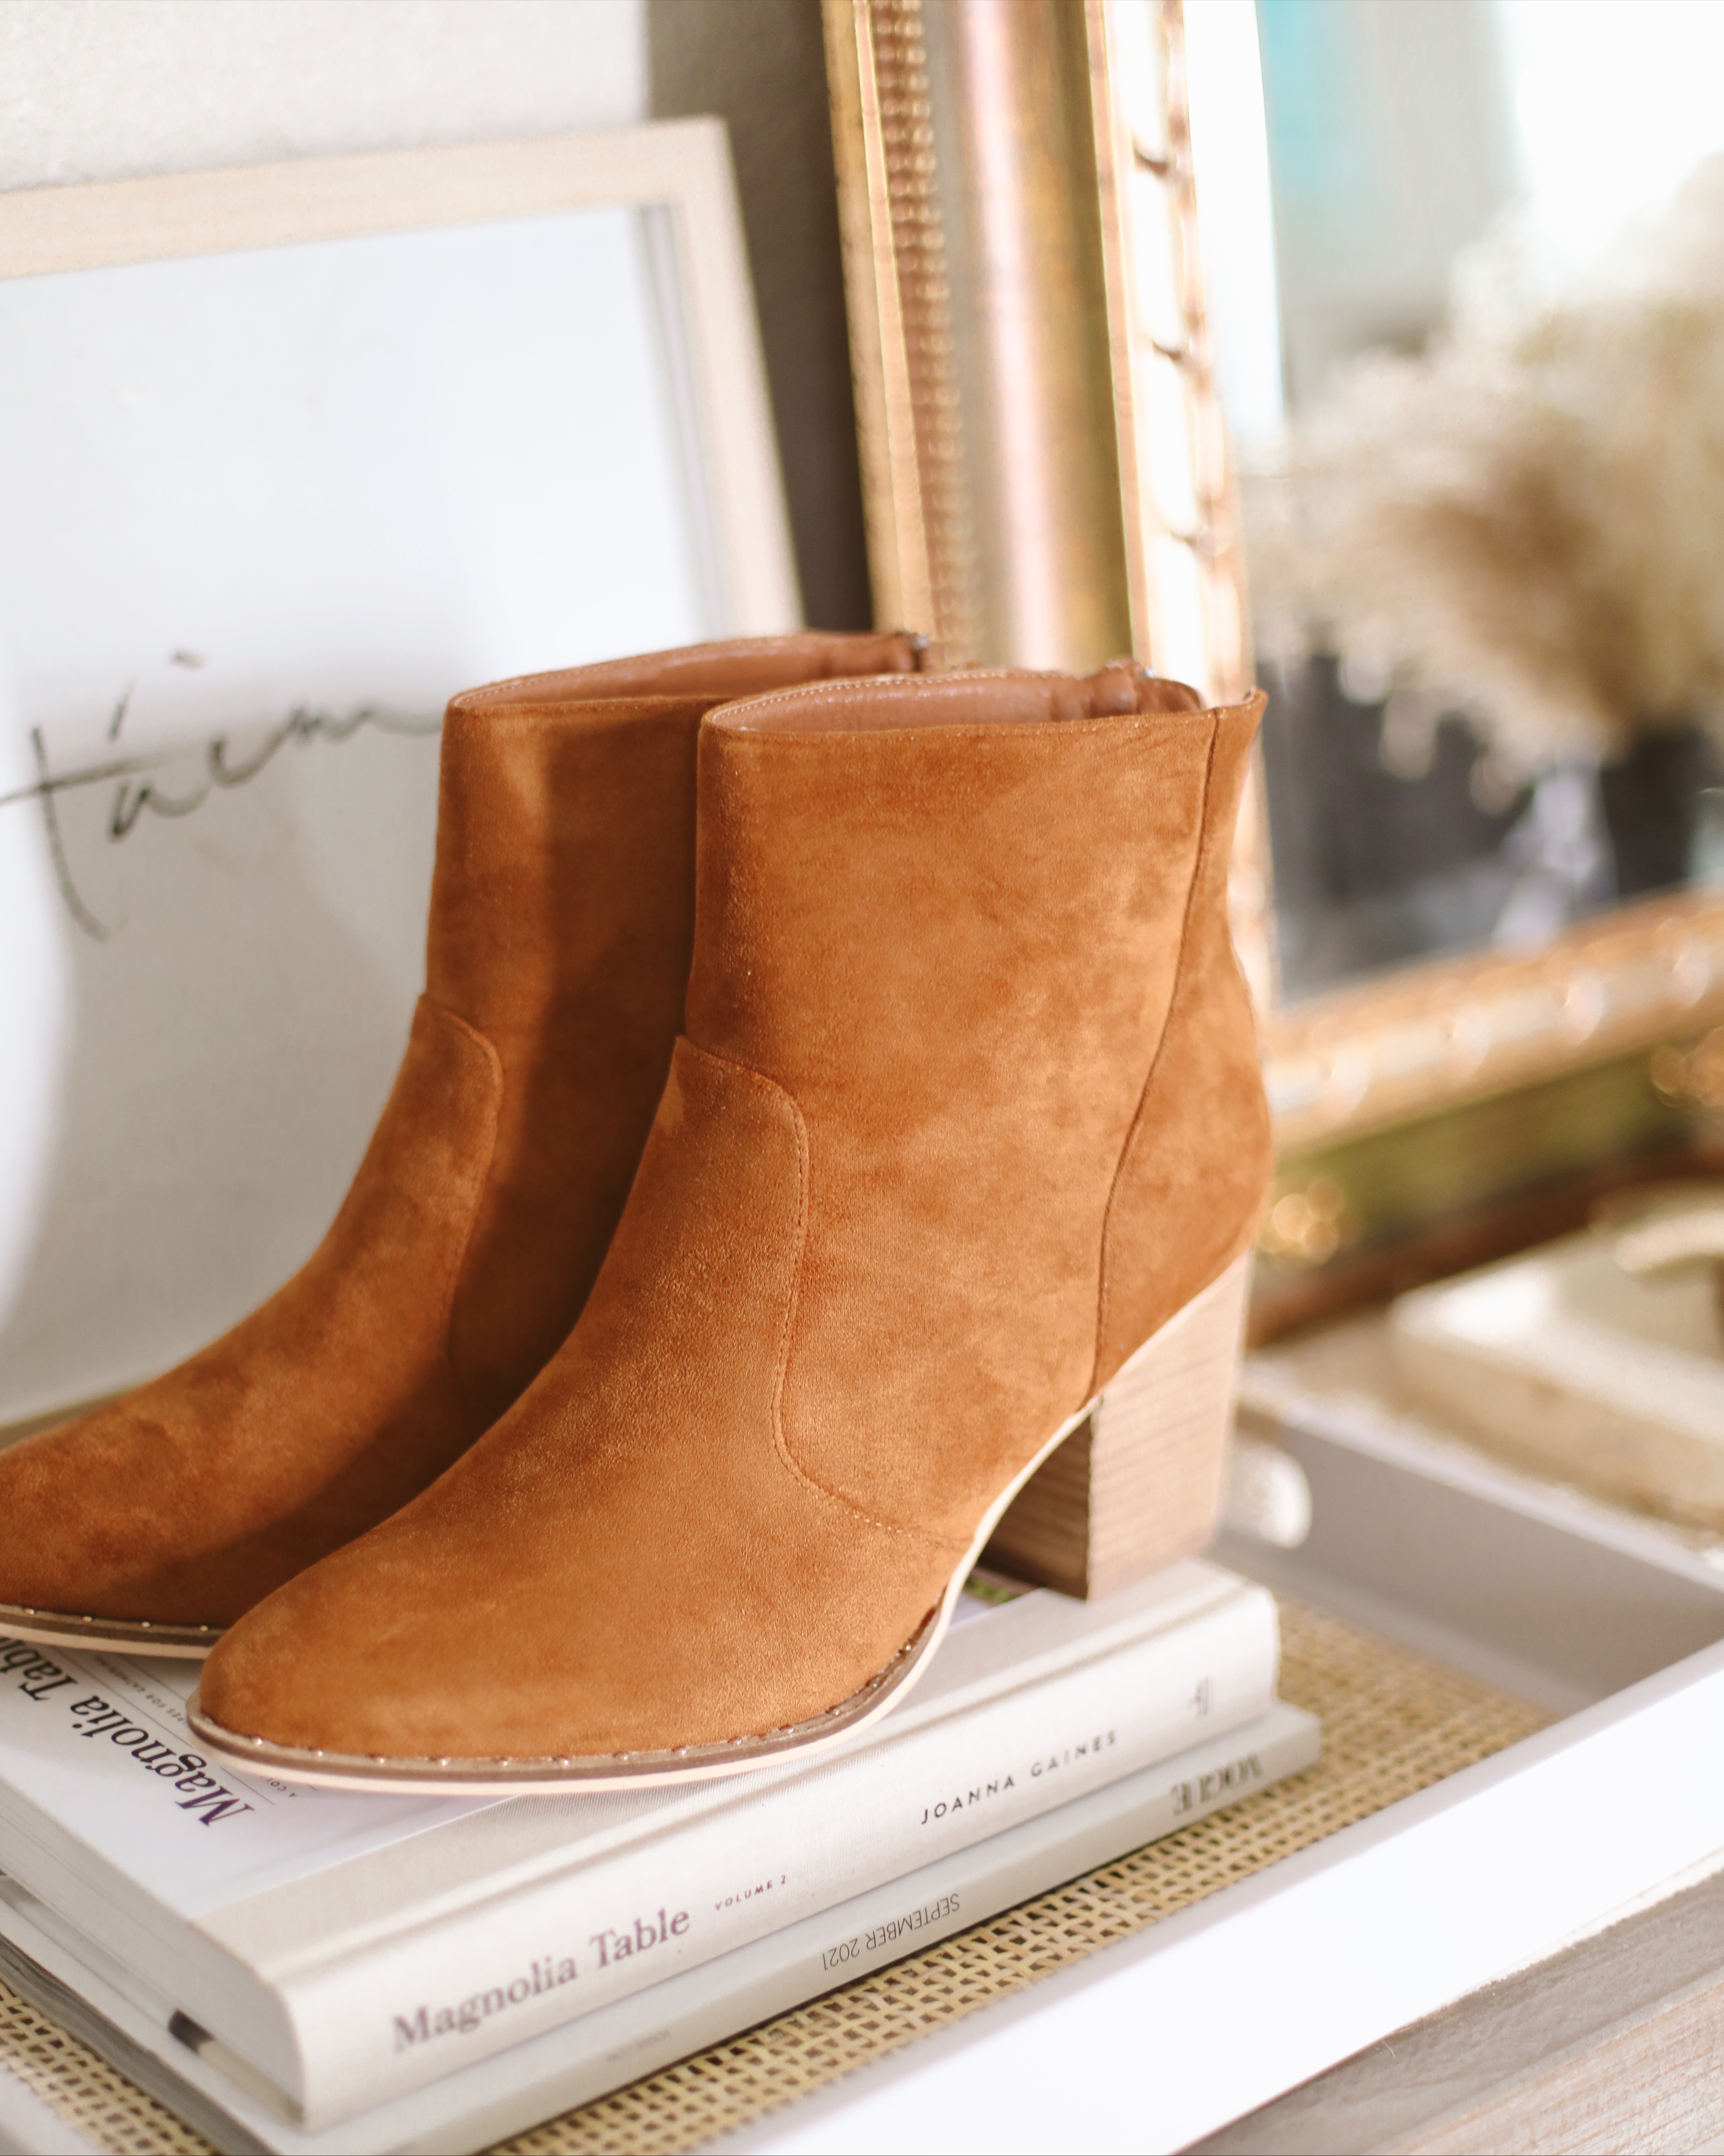 Red Dress Boutique Chic Tan Ankle Booties | Affordable by Amanda